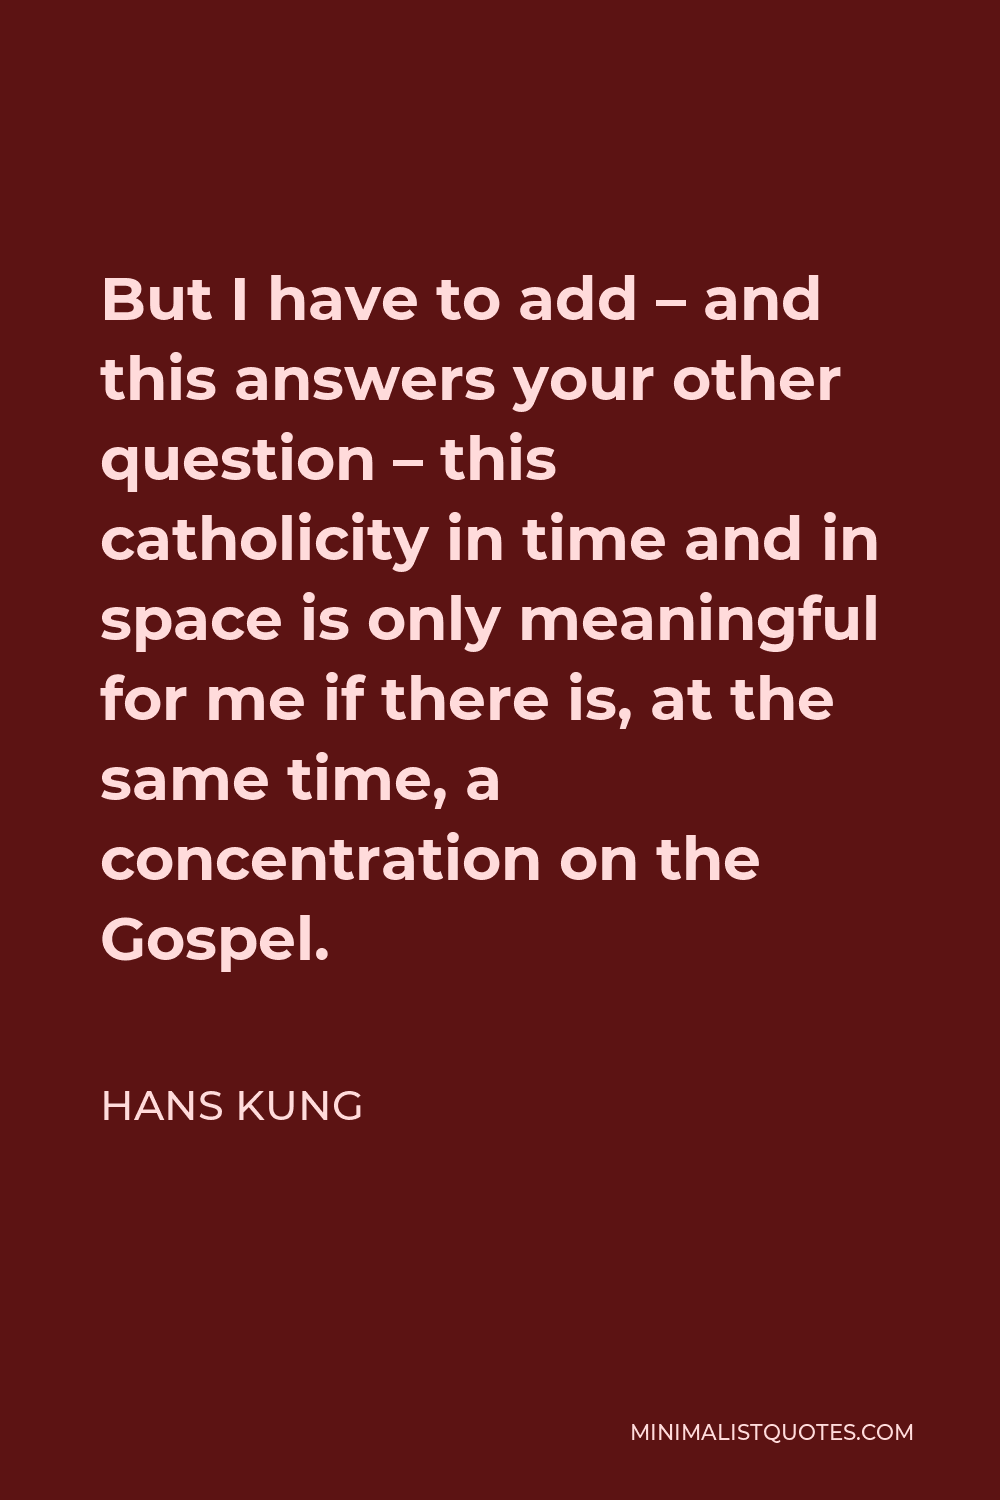 Hans Kung Quote - But I have to add – and this answers your other question – this catholicity in time and in space is only meaningful for me if there is, at the same time, a concentration on the Gospel.